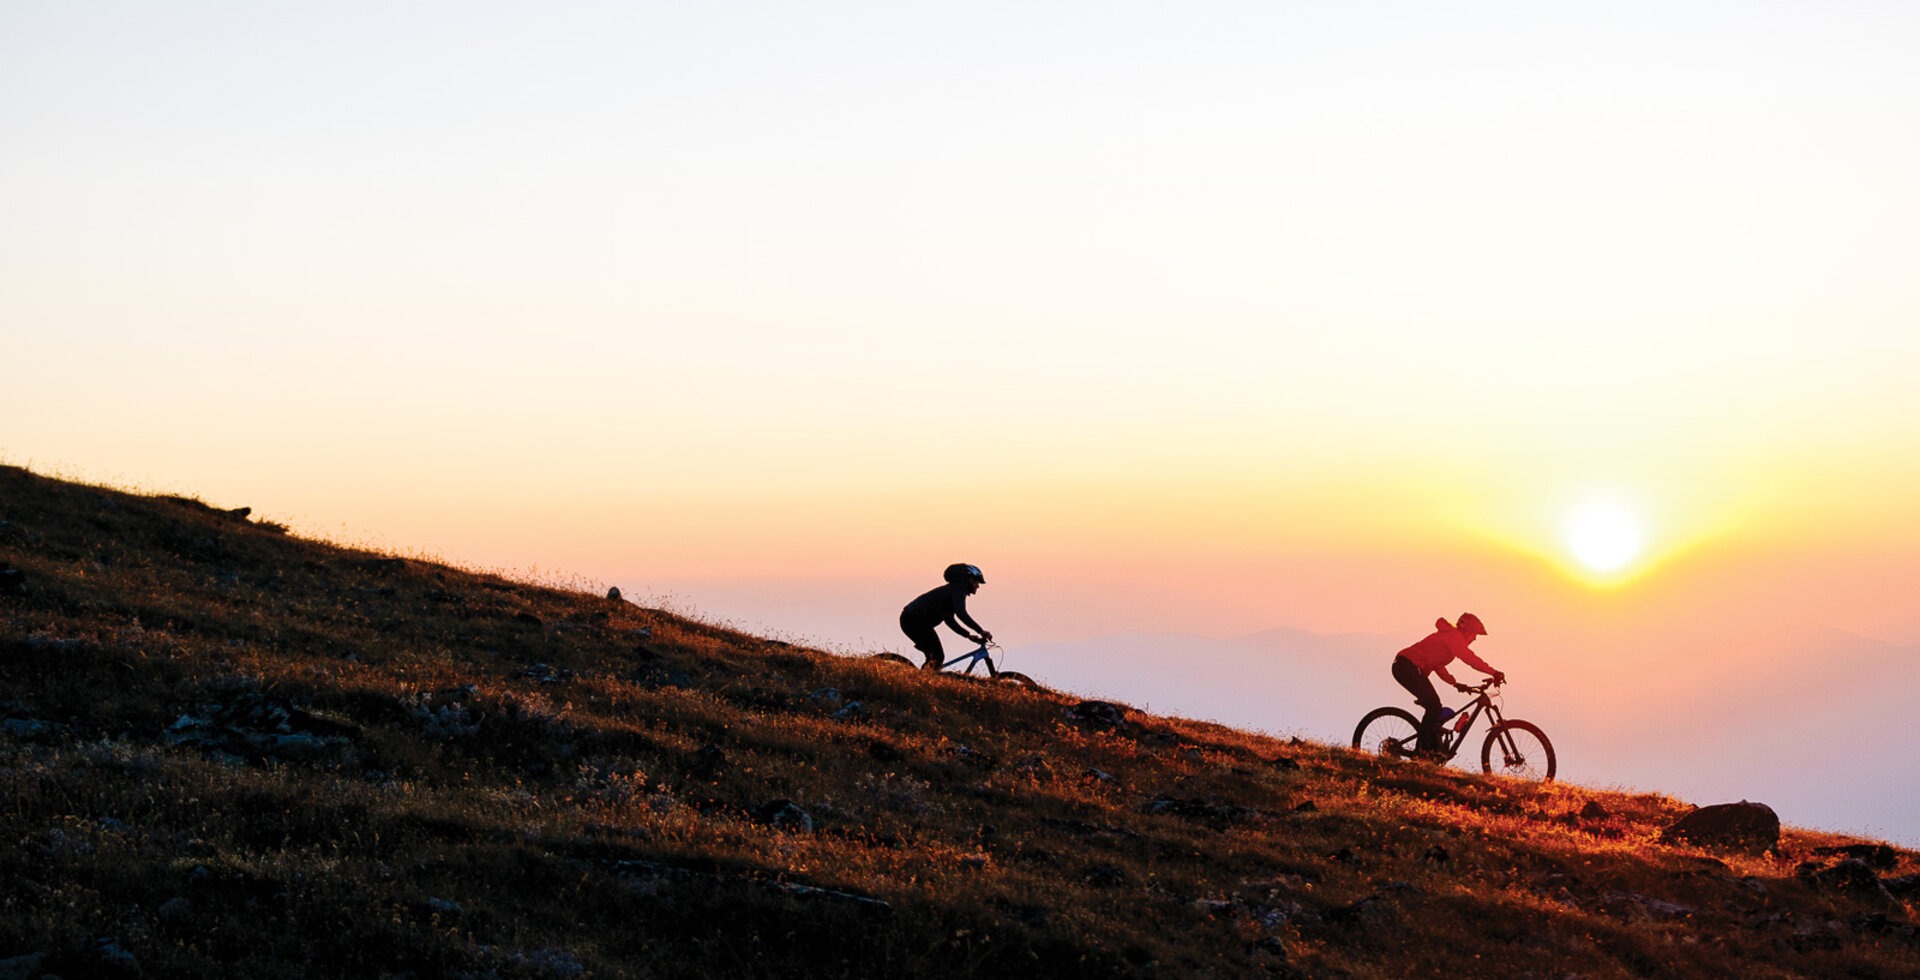 Nicki Trimble and Erin Bergey ride through the last flush of color on a dusk-lit descent in the Big Belt Mountains of Montana. Classified as an island range, the Big Belts are isolated as if adrift in a sea of Montana’s vast prairies and flatlands.